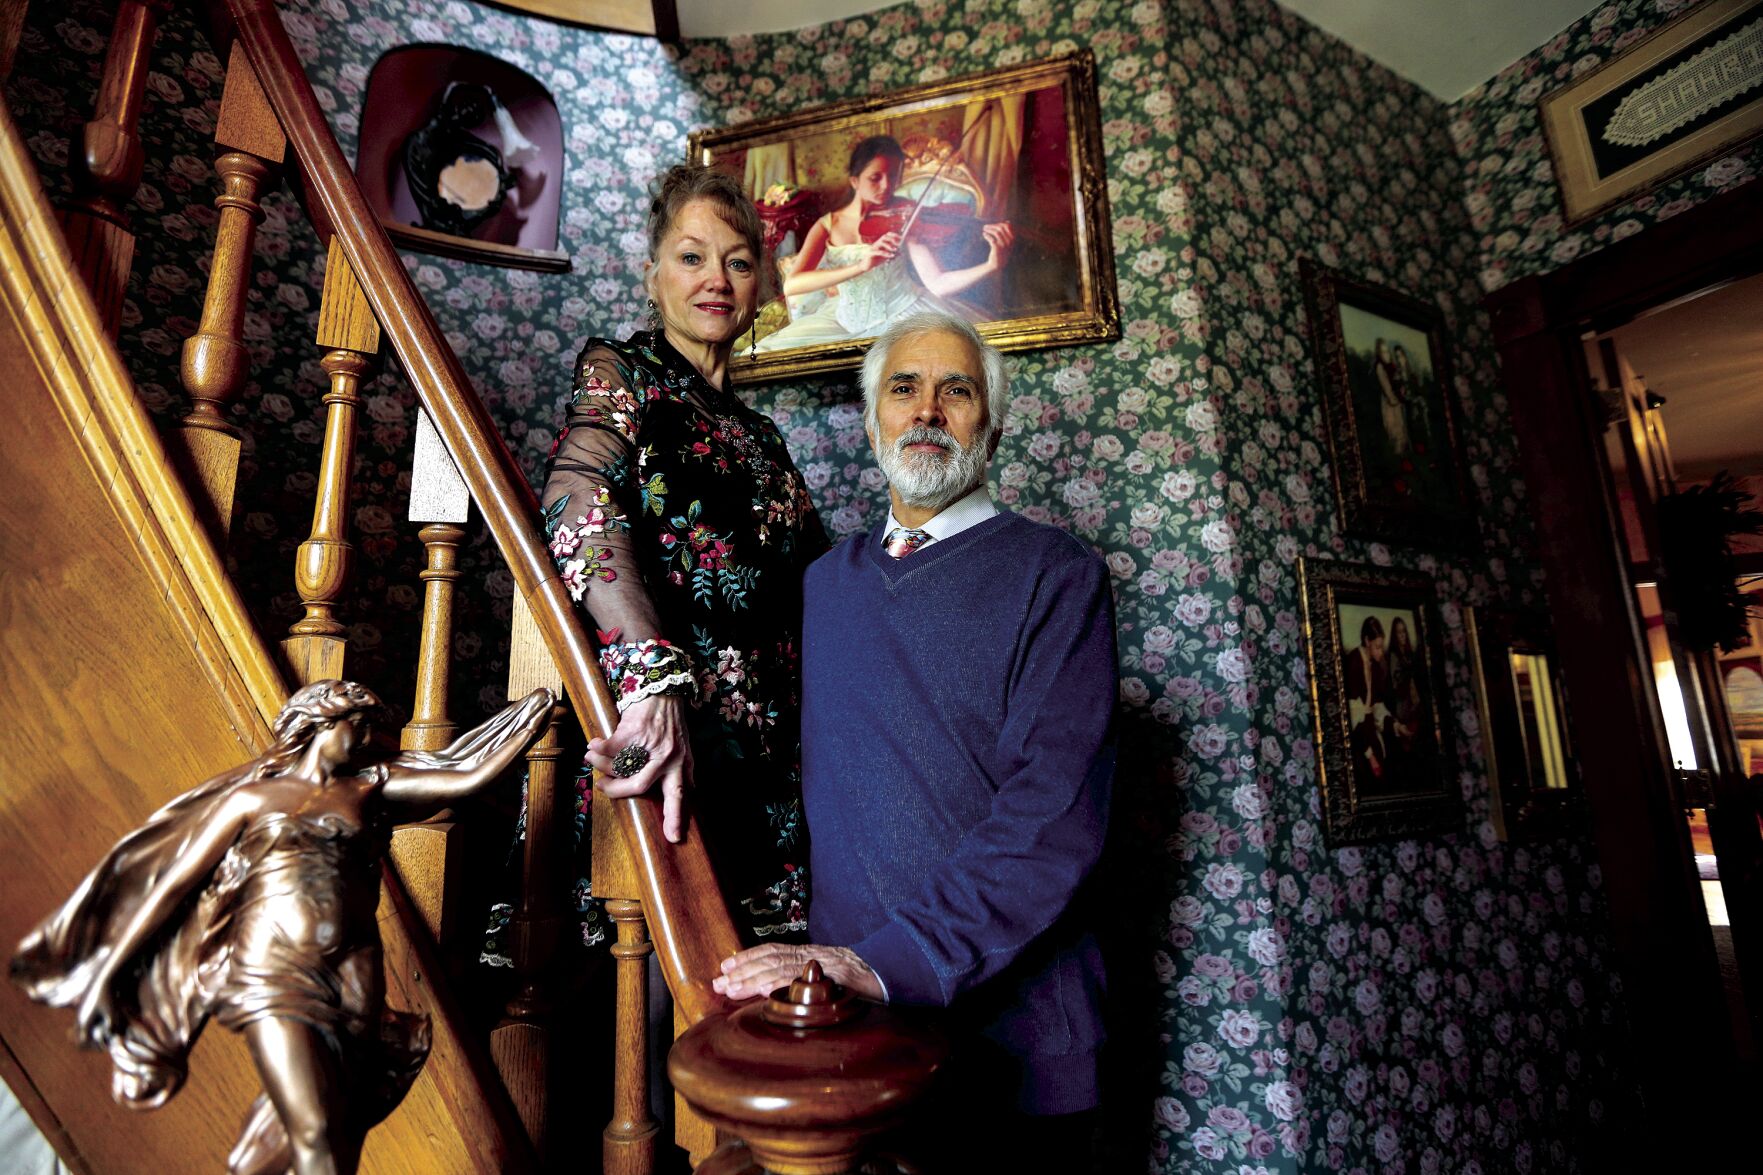 Artists Patricia and Naser Shahrivar own D’Arte Manor Gallery and B&B in Maquoketa, Iowa.    PHOTO CREDIT: Dave Kettering